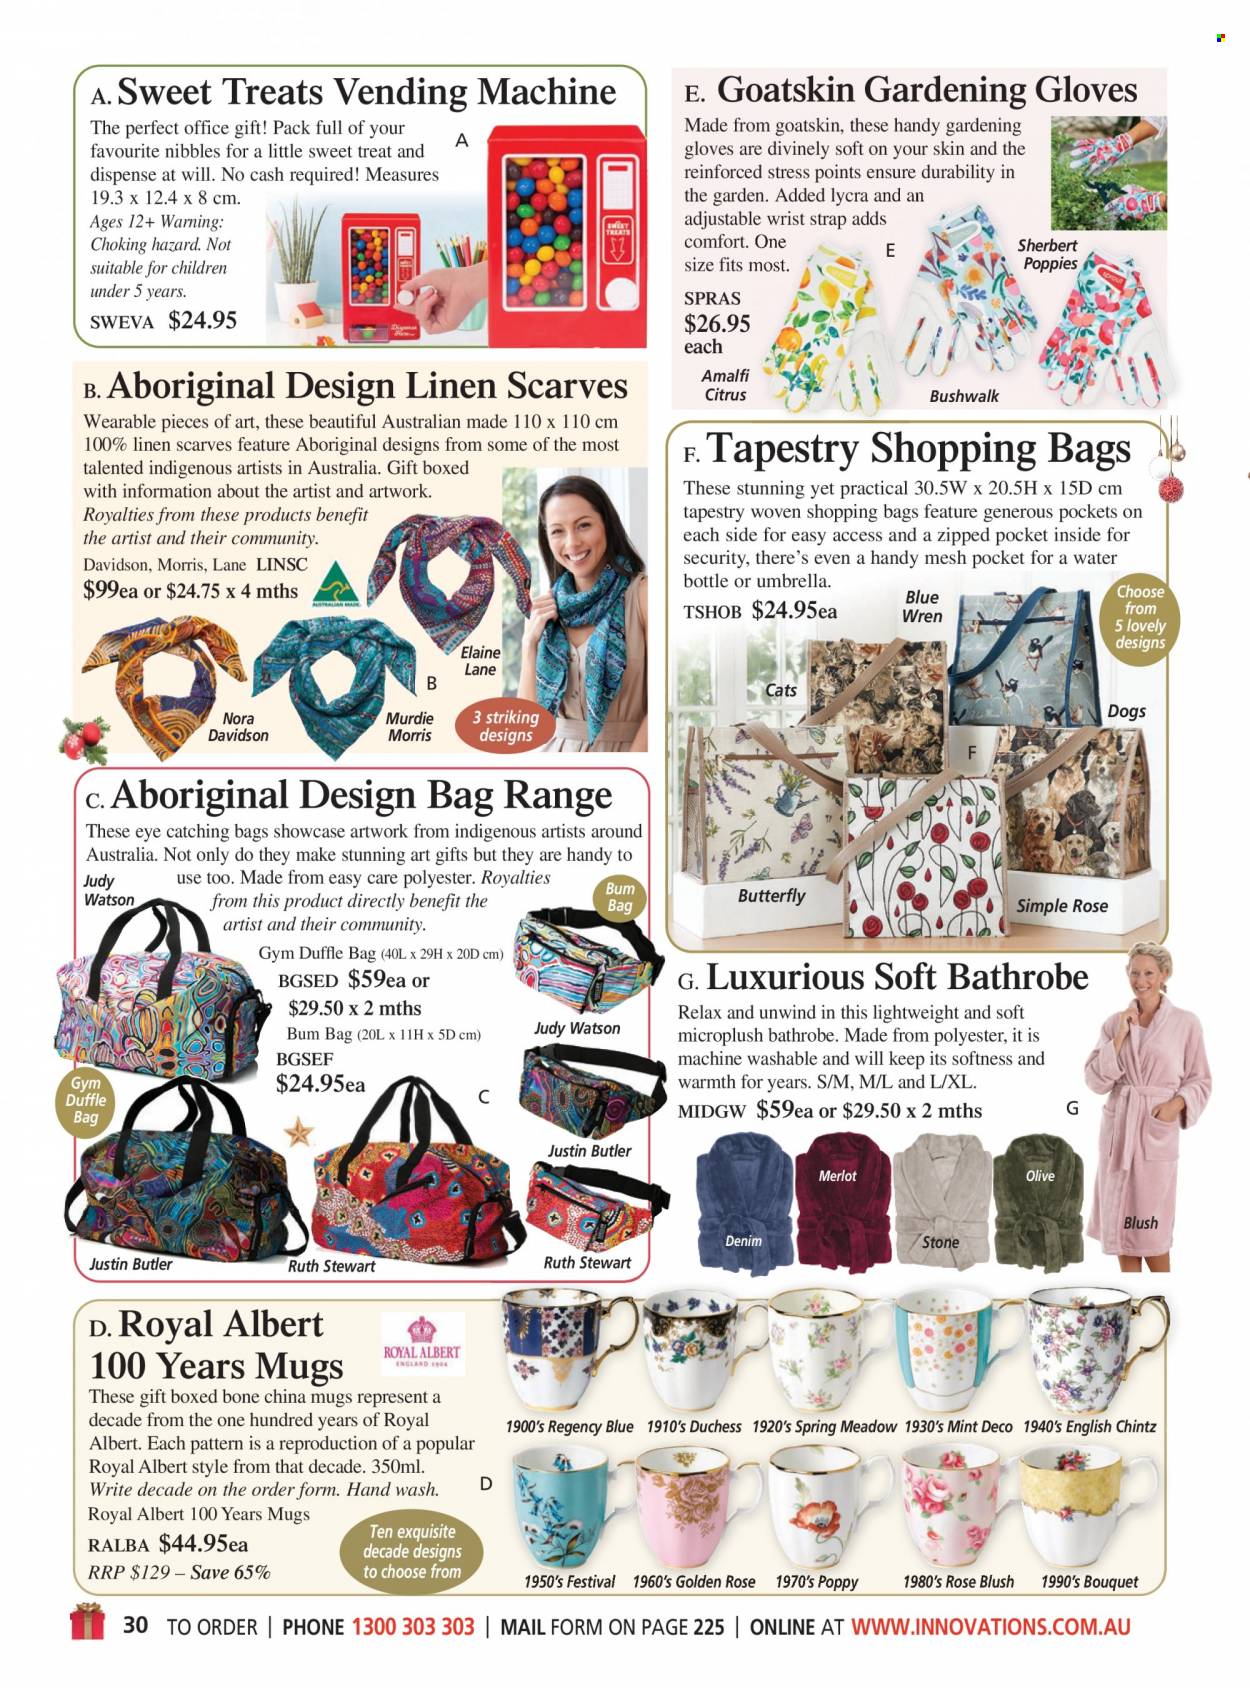 thumbnail - Innovations Catalogue - Sales products - gloves, drink bottle, linens, tapestry, scarf, umbrella, bathrobe. Page 30.